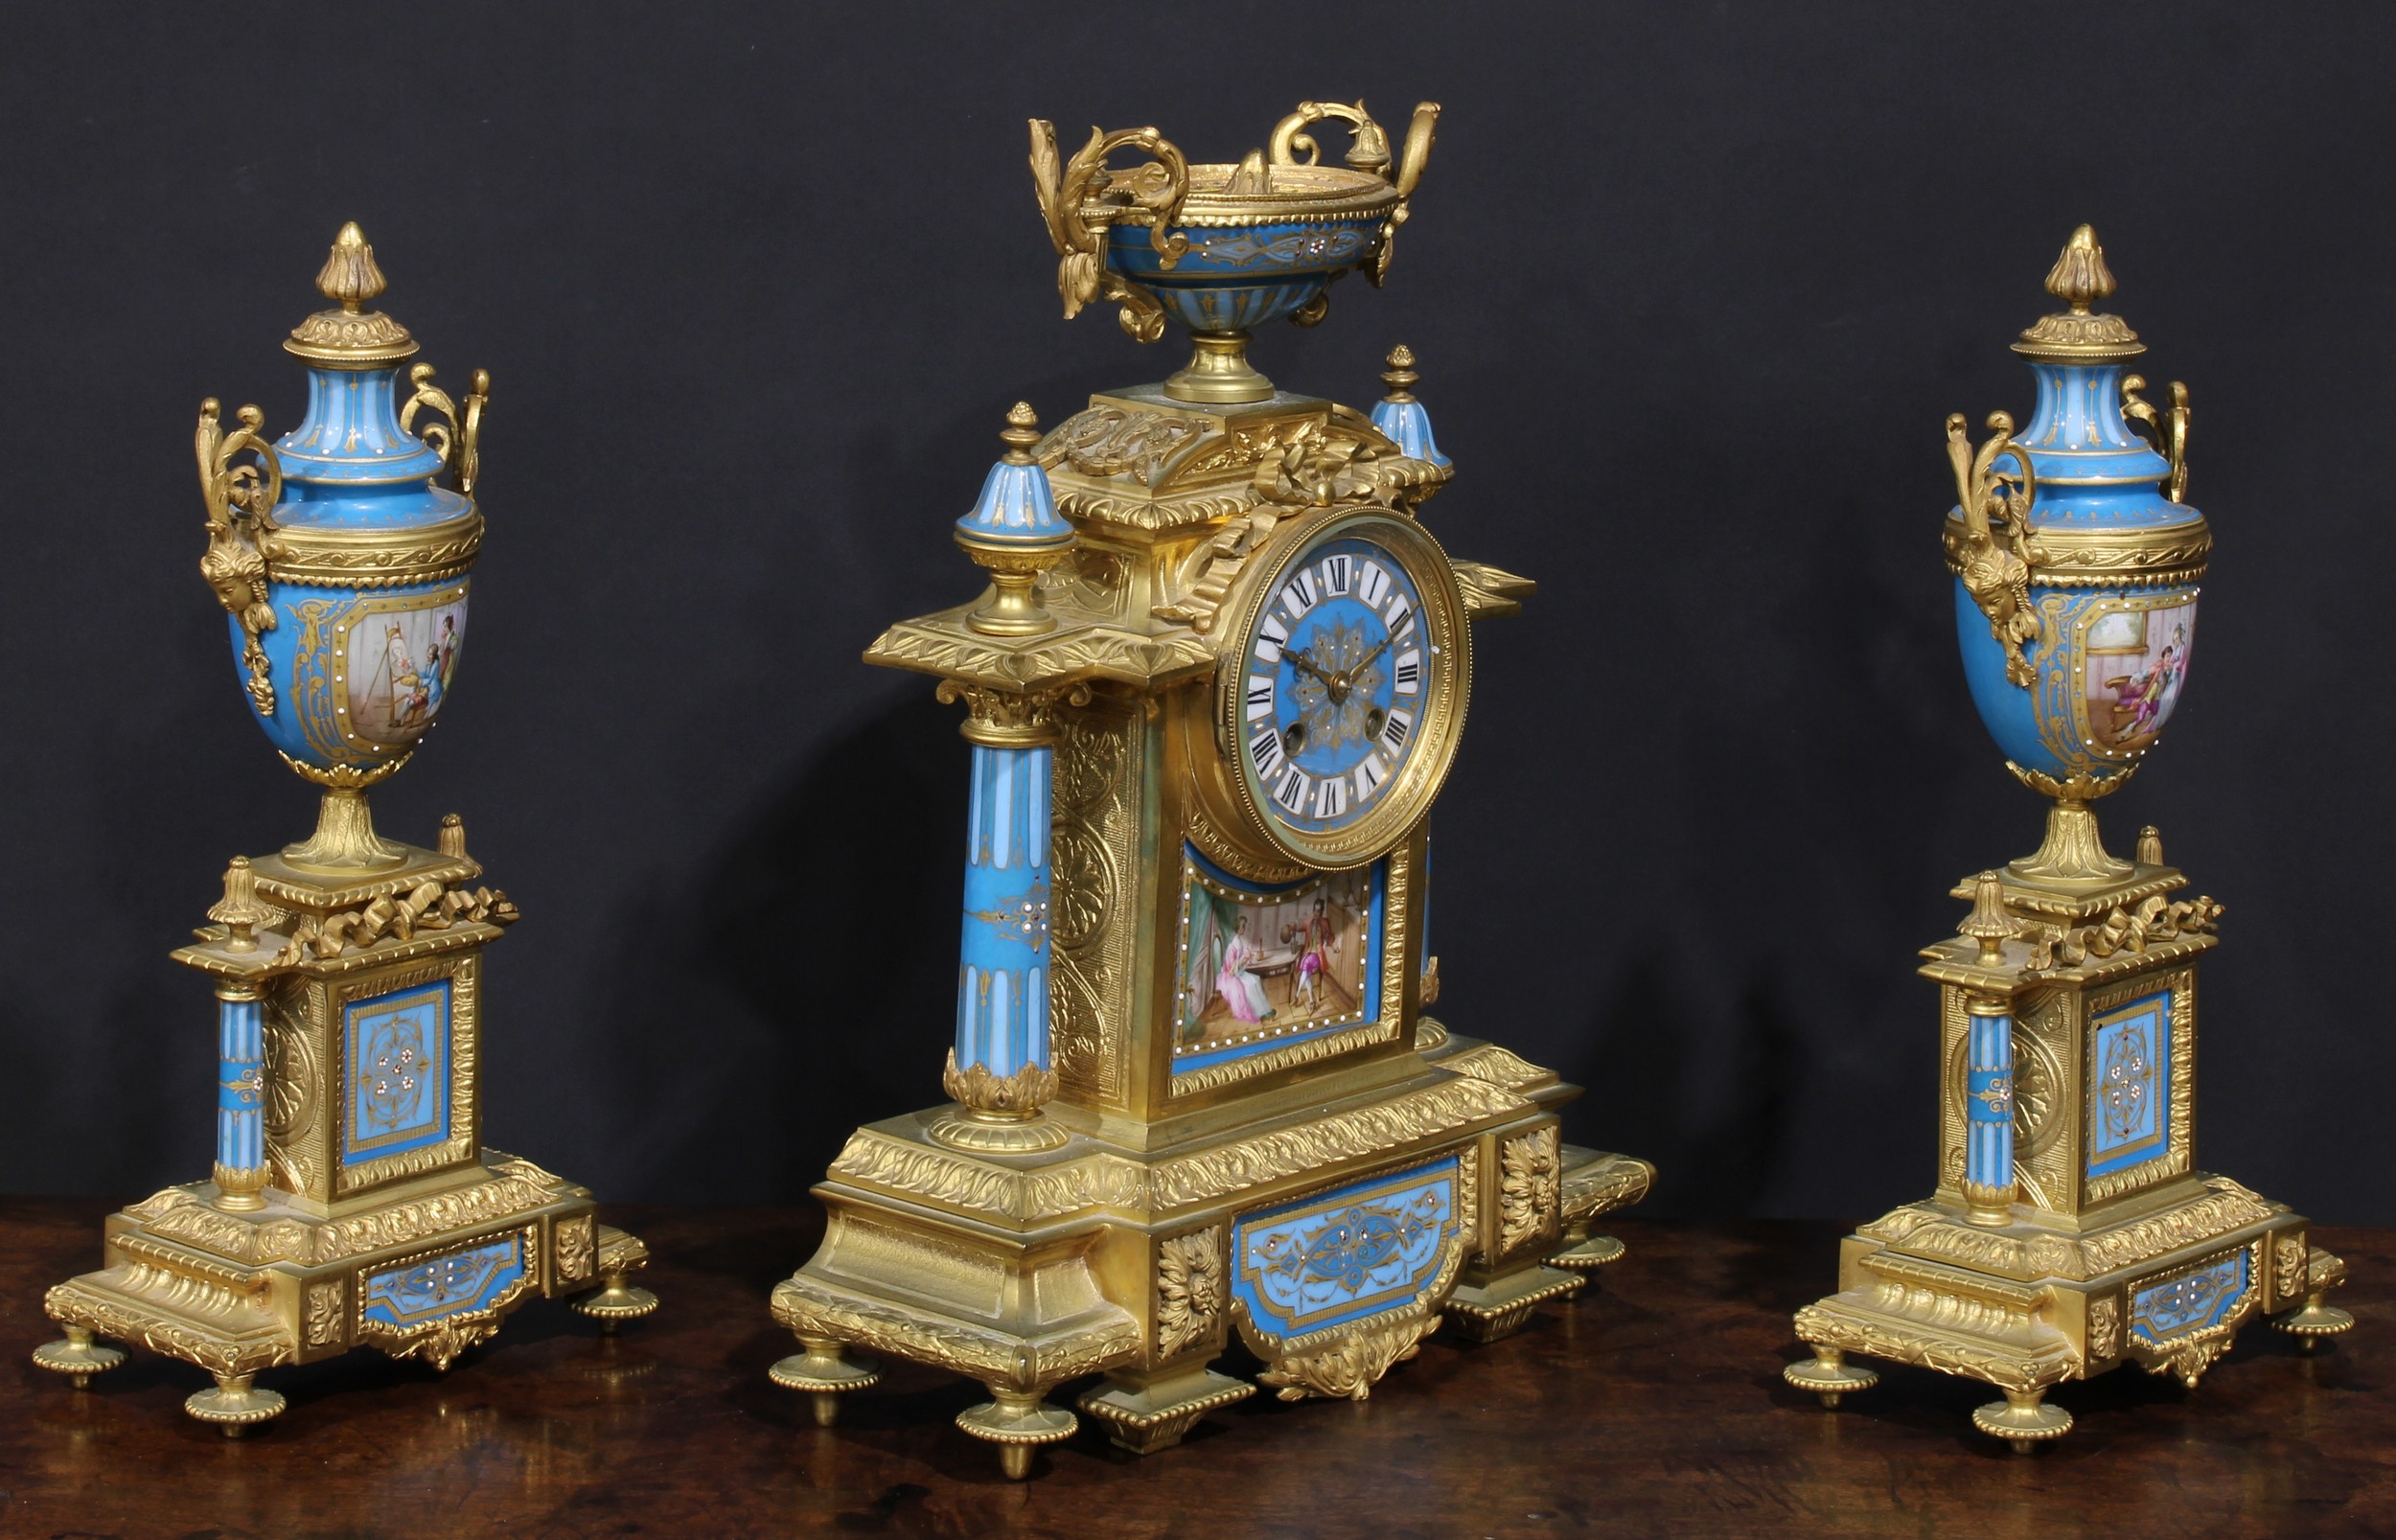 A 19th century French ormolu and porcelain clock garniature, in the Louis XVI Revival taste, 9cm - Image 2 of 4